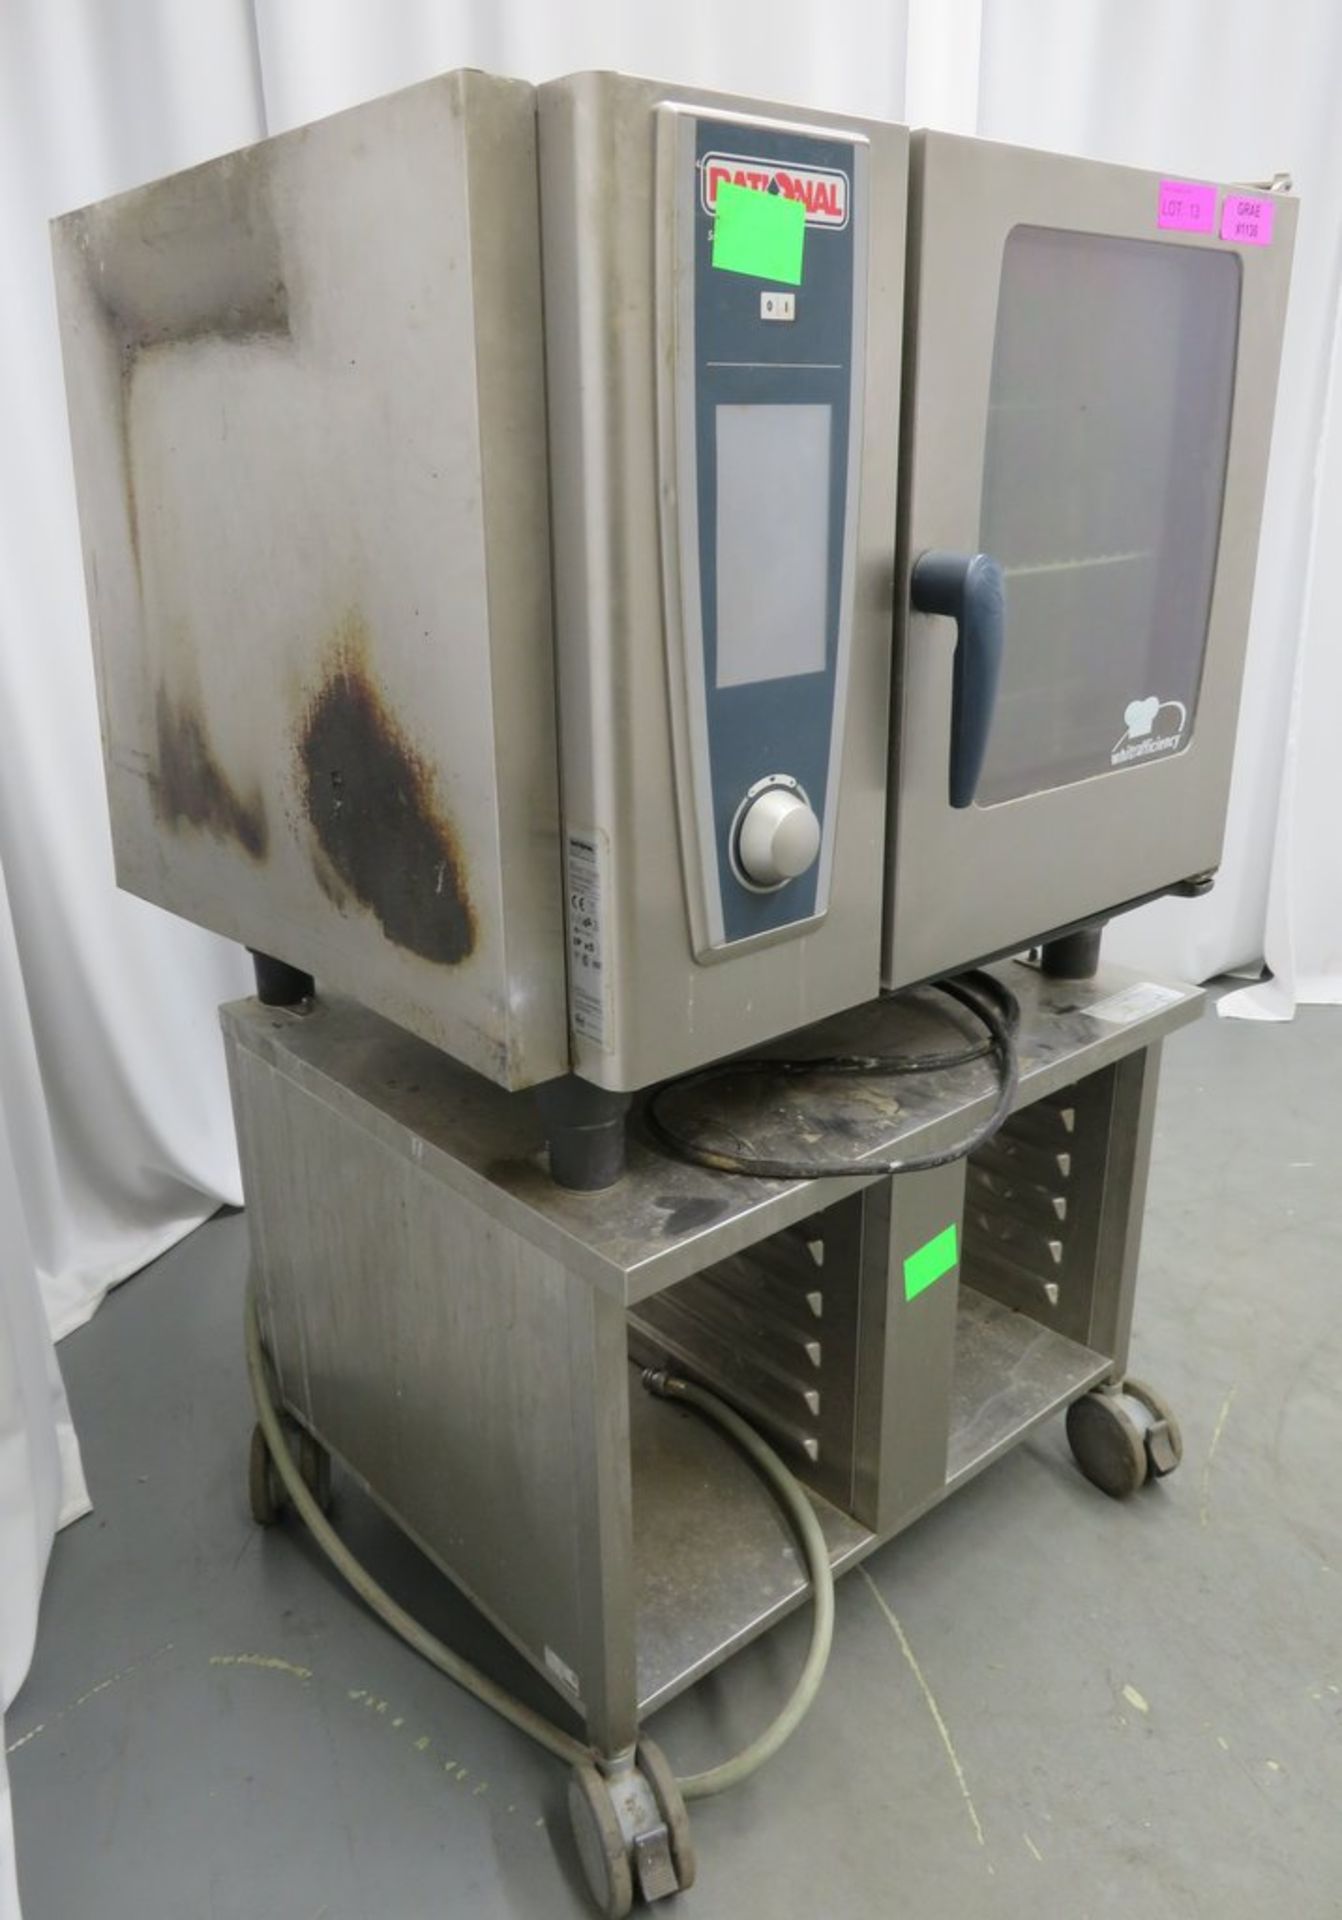 Rational SCC WE 61 6 grid combi oven, 3 phase electric - Image 2 of 9